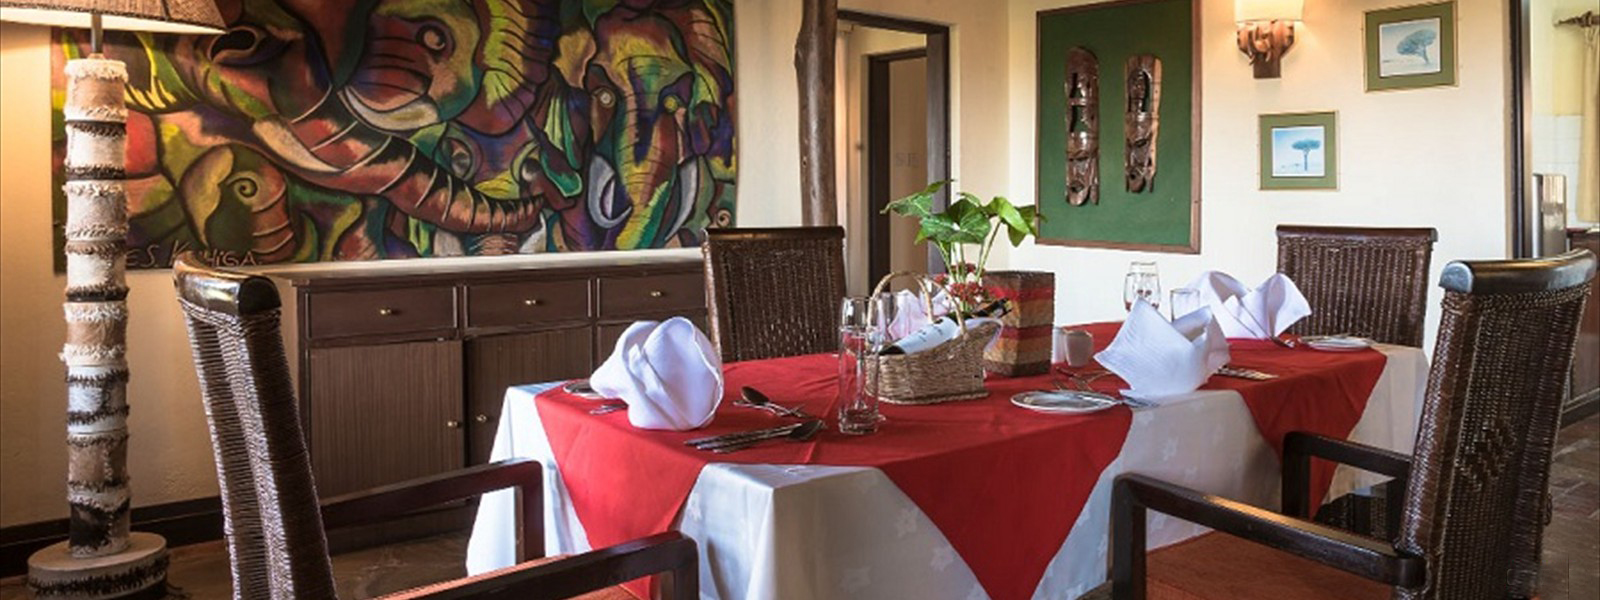 AMBOSELI SERENA LODGE, ROOM RATES, ROOMS, SINGLE ROOM, DOUBLE ROOM, SUITES, PRESIDENTIAL SUITE, FULL BOARD, BED AND BREAKFAST, FACILITIES, WHAT TO DO, DISCOUNTS, BEST OFFERS